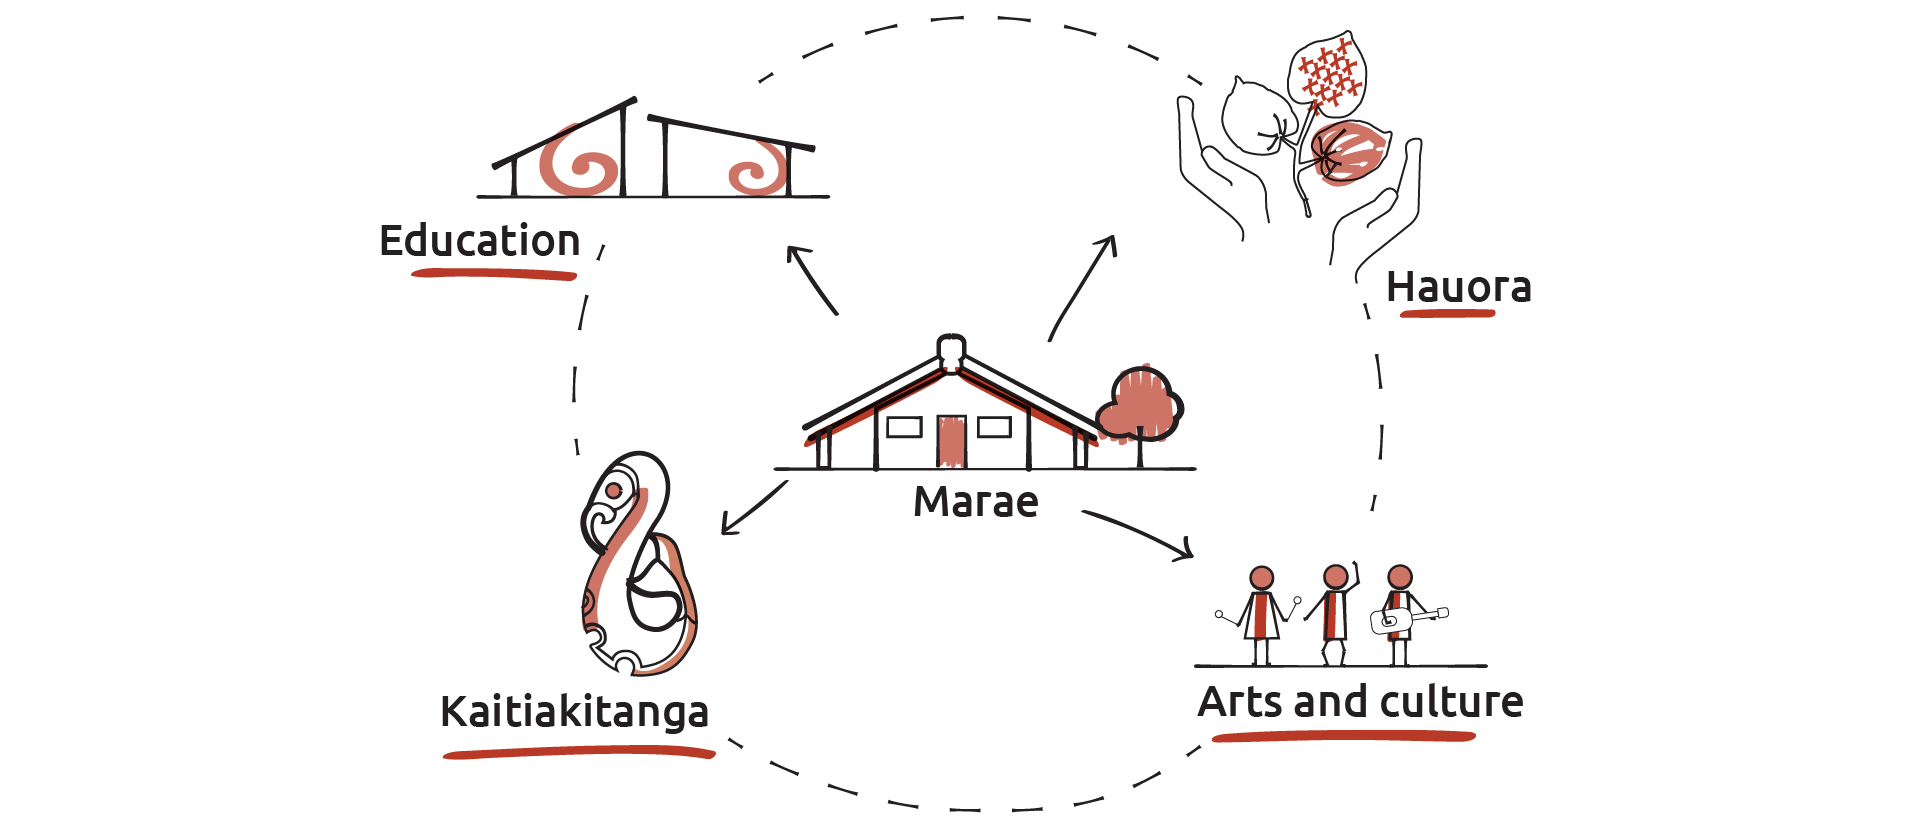 A marae sits in the middle of a circle, connected to concepts around the outside of it; education, hauora, arts and culture, and kaitiakitanga.